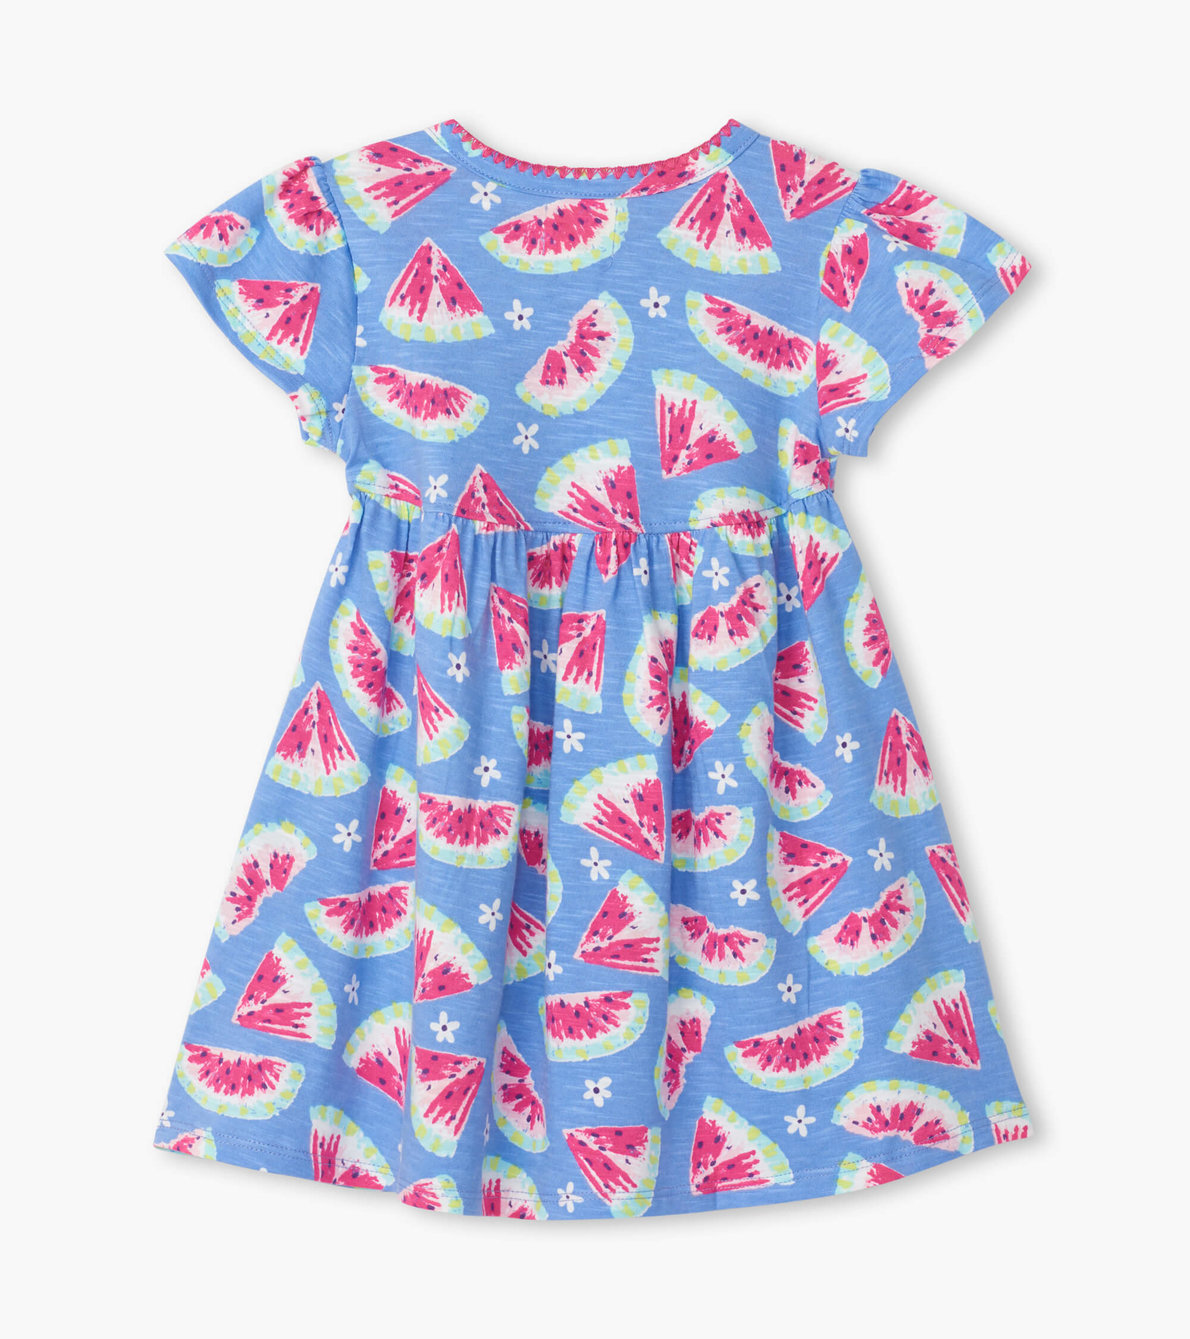 View larger image of Watermelon Slices Baby Puff Dress